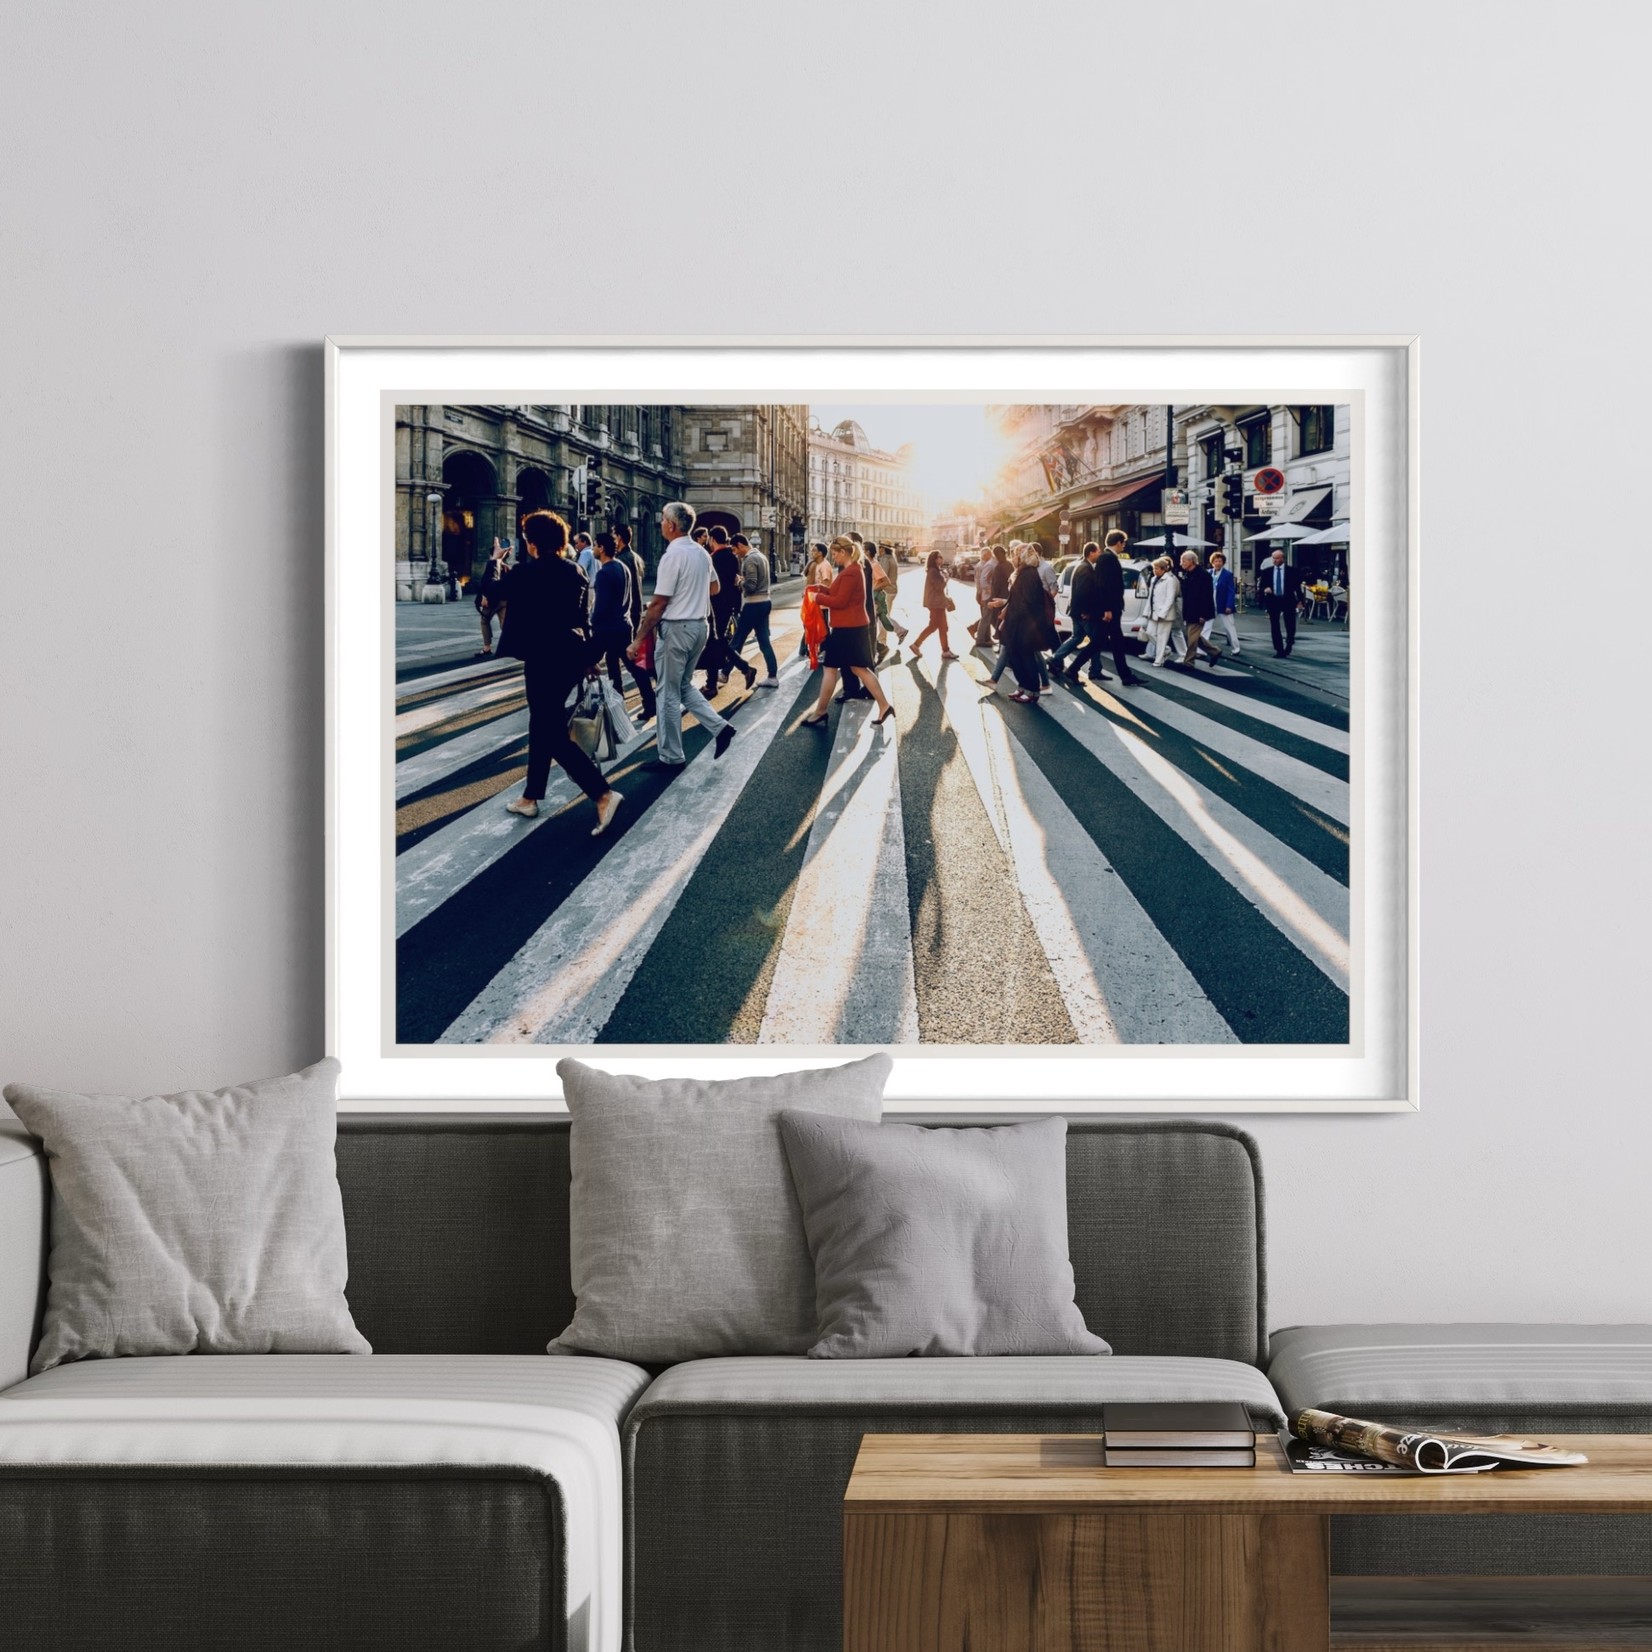 Framed Print on Rag Paper: Out in the City by P. Kolln